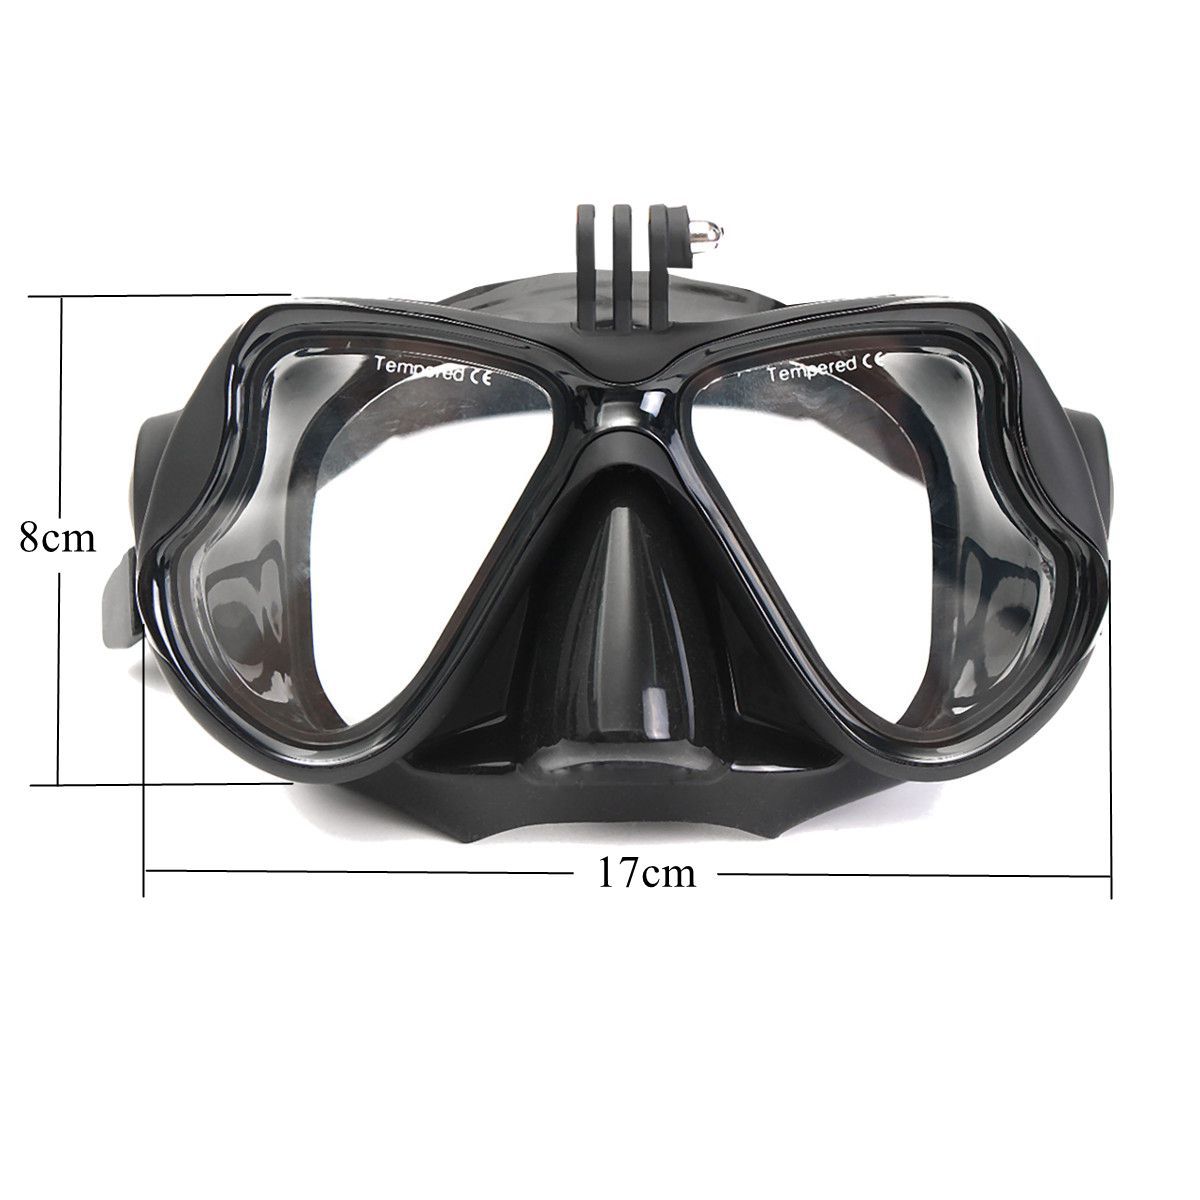 Camera-Mount-Diving-Mask-Oceanic-Scuba-Snorkel-Swimming-Goggles-Glasses-For-GoPro-Action-Camera-1177518